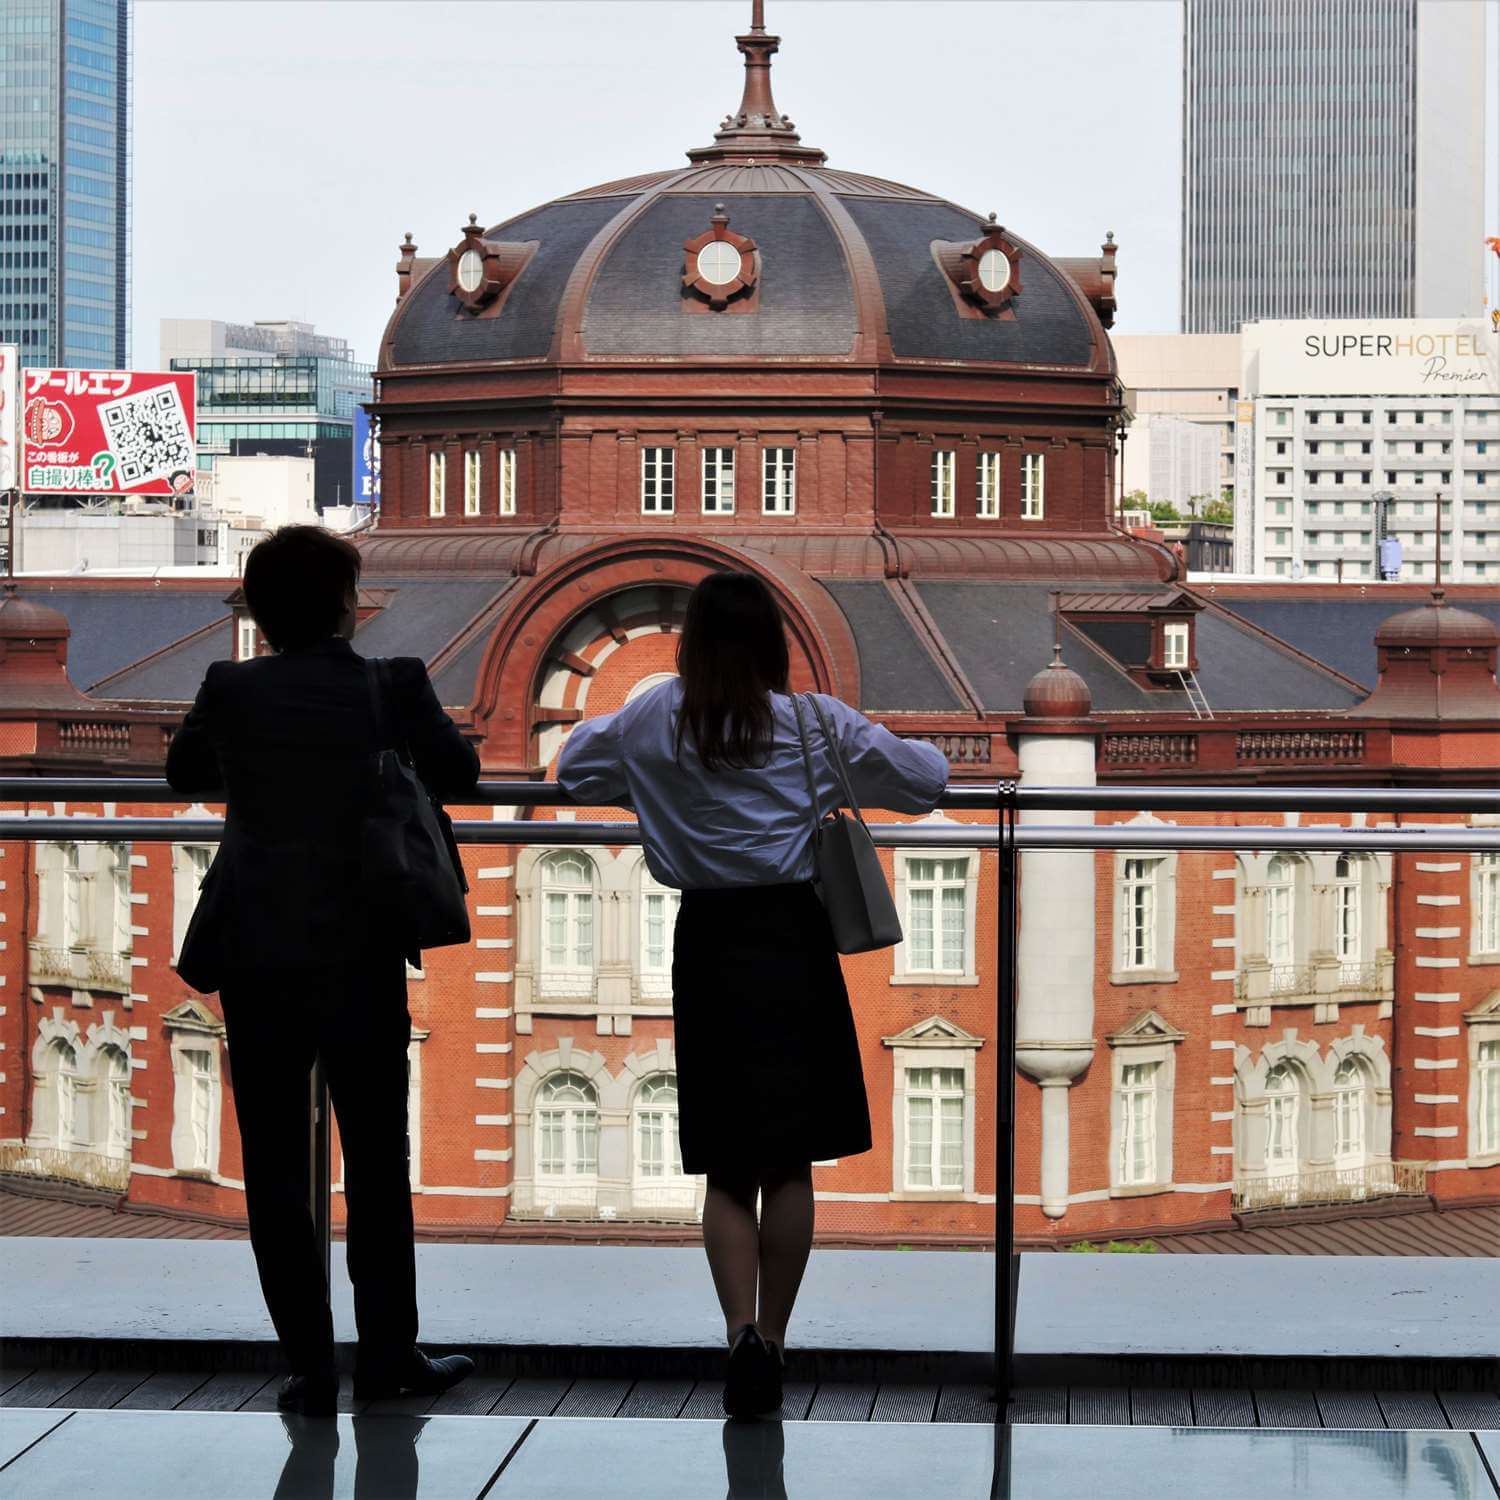 The Marunouchi District, which is located on the west side of Tokyo Station, has many fashionable shops and restaurants = Shutterstock 7